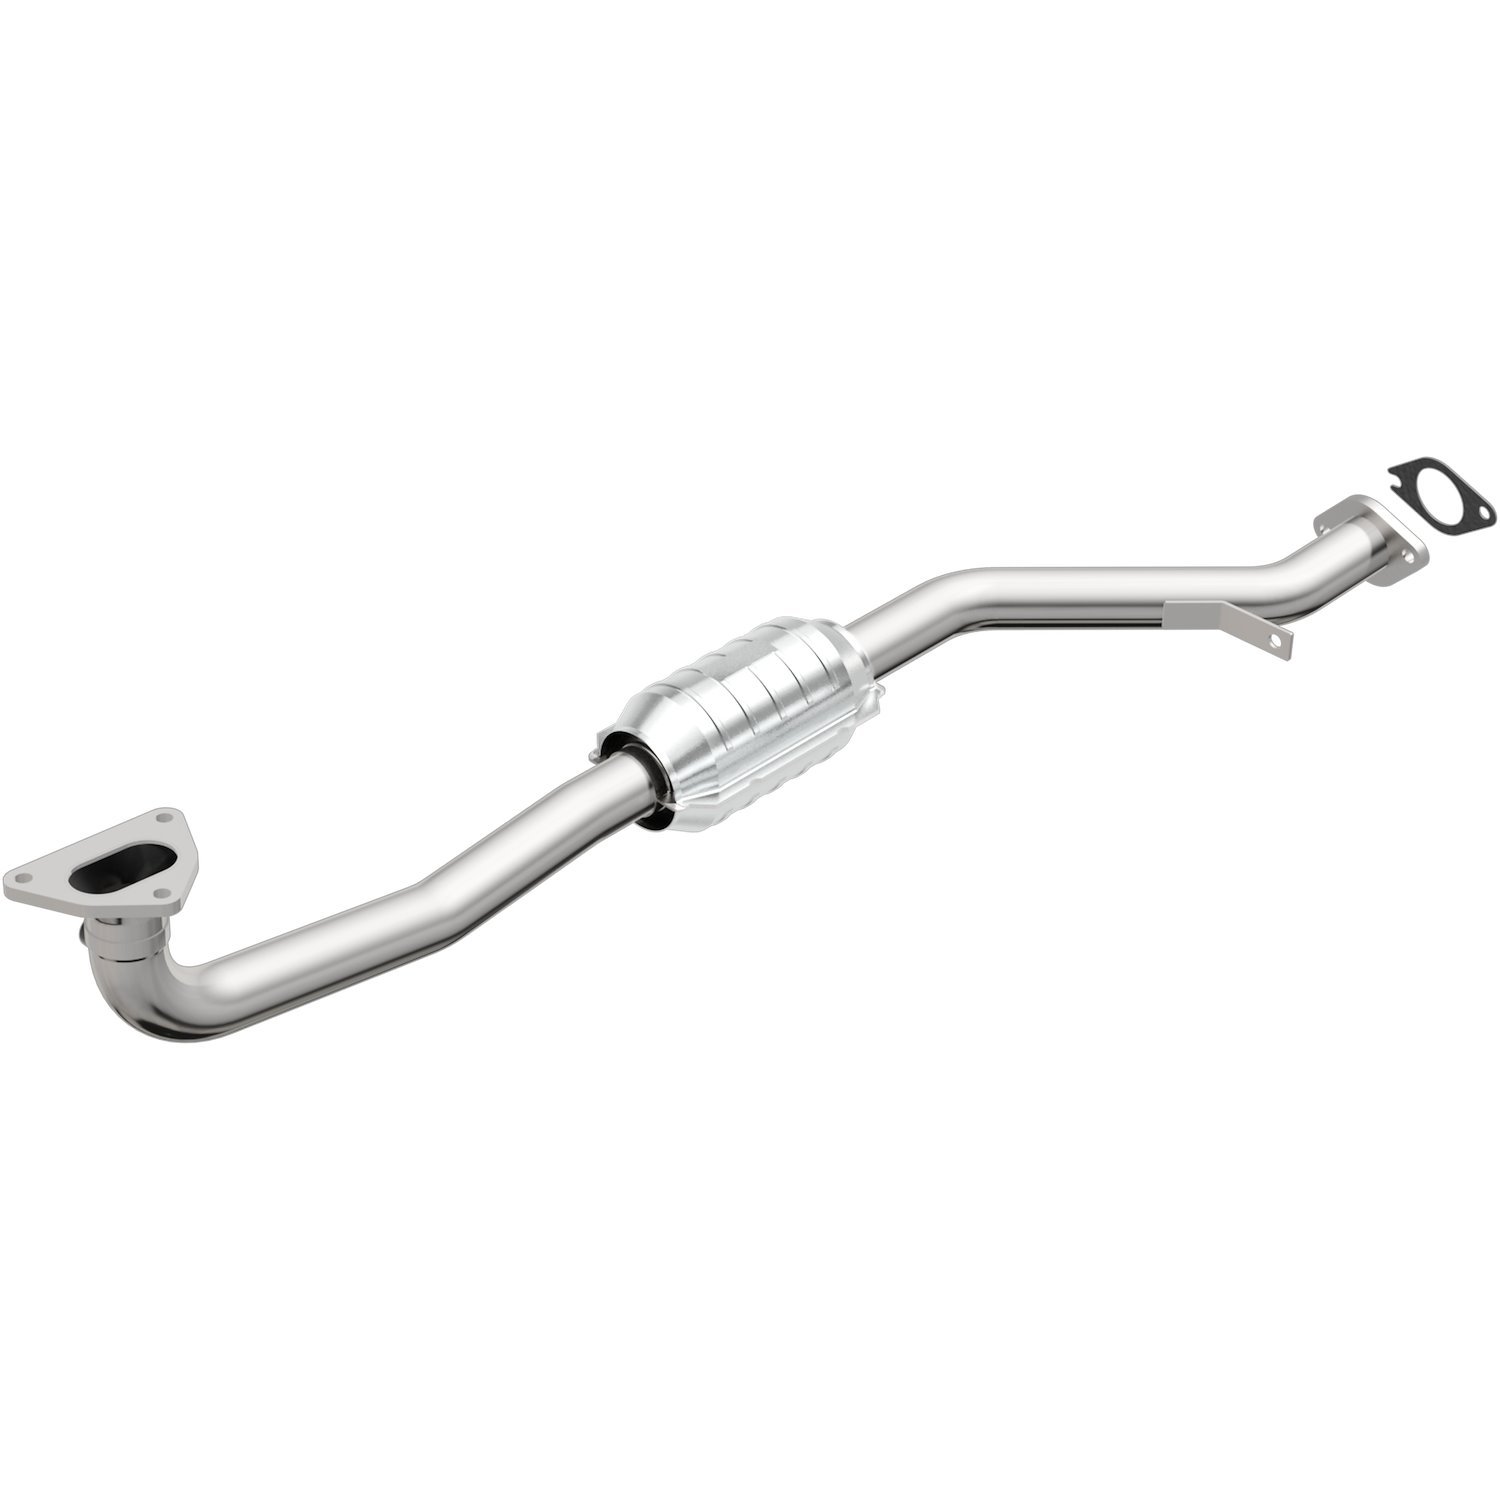 2001-2004 Subaru Outback OEM Grade Federal / EPA Compliant Direct-Fit Catalytic Converter